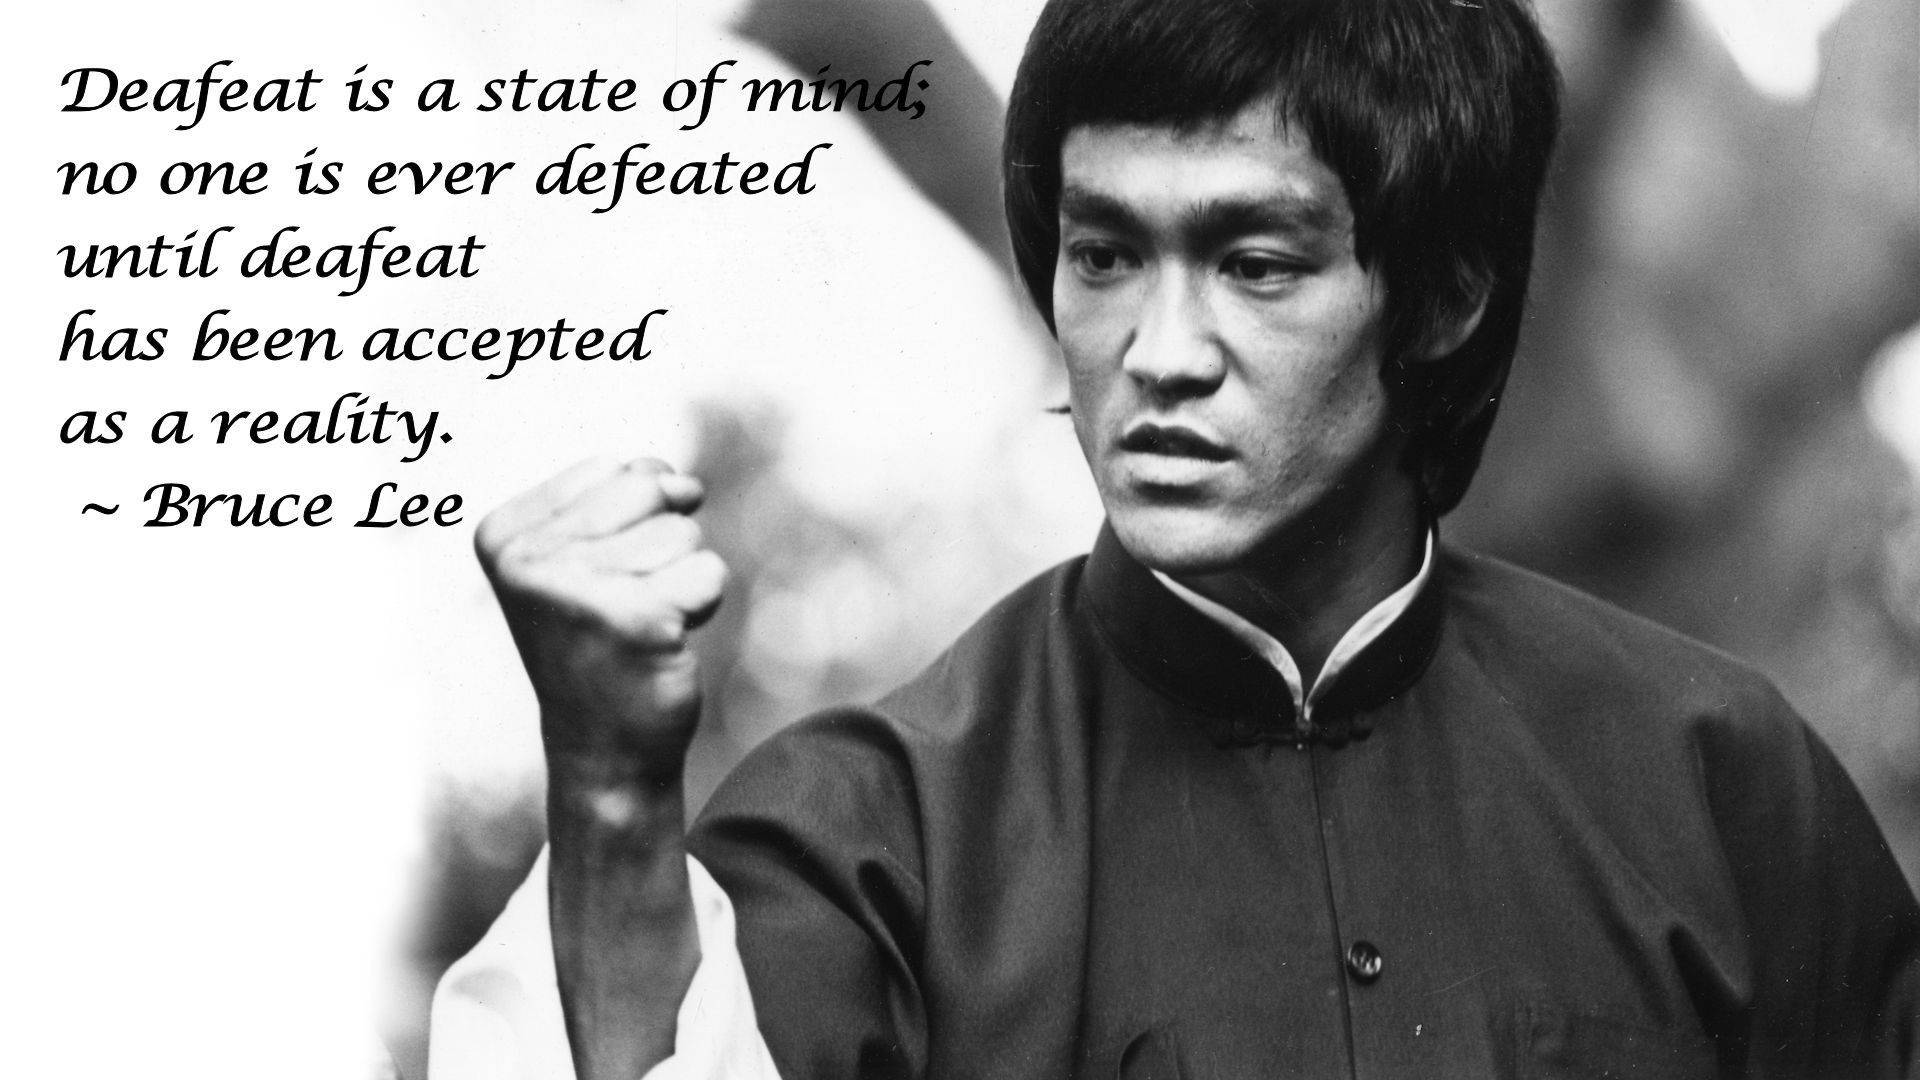 Bruce Lee Quote About Defeat